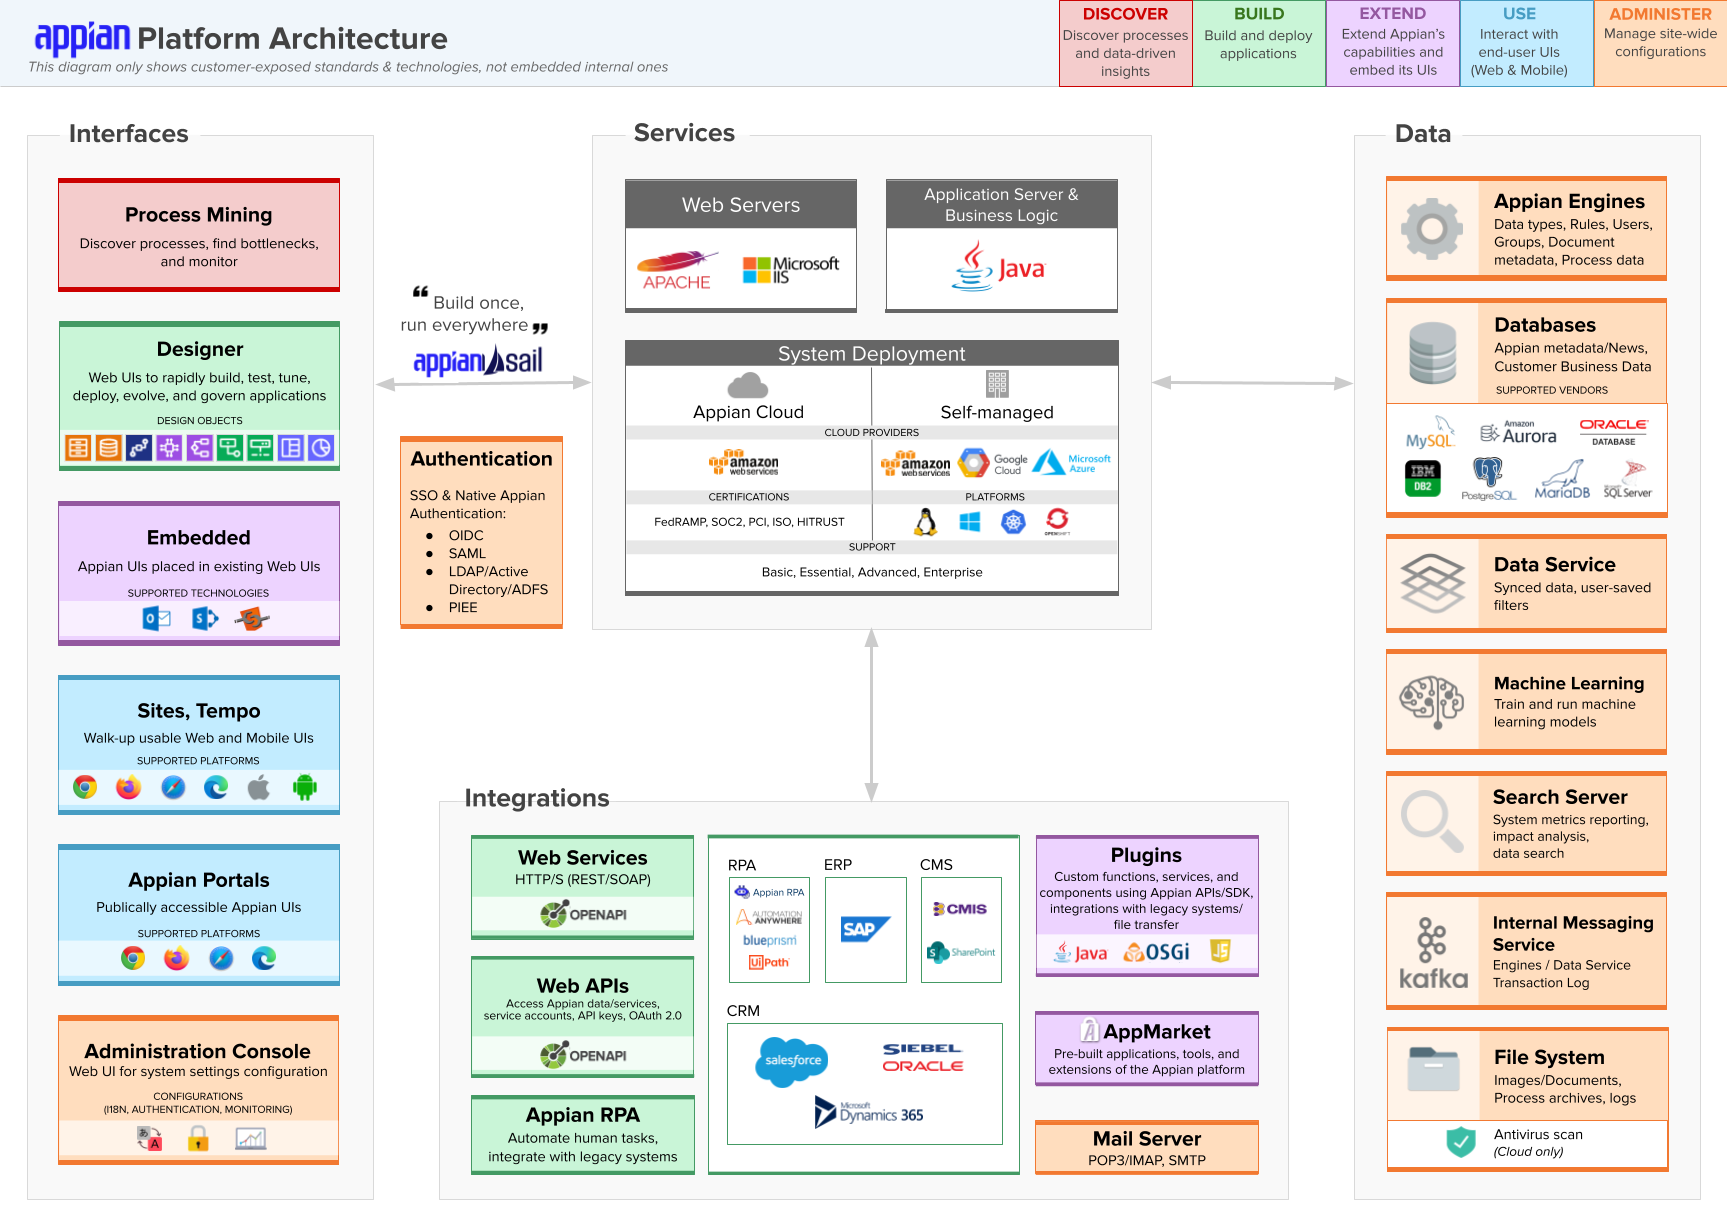 images/How_Appian_Works/enterprise_architecture_overview.png